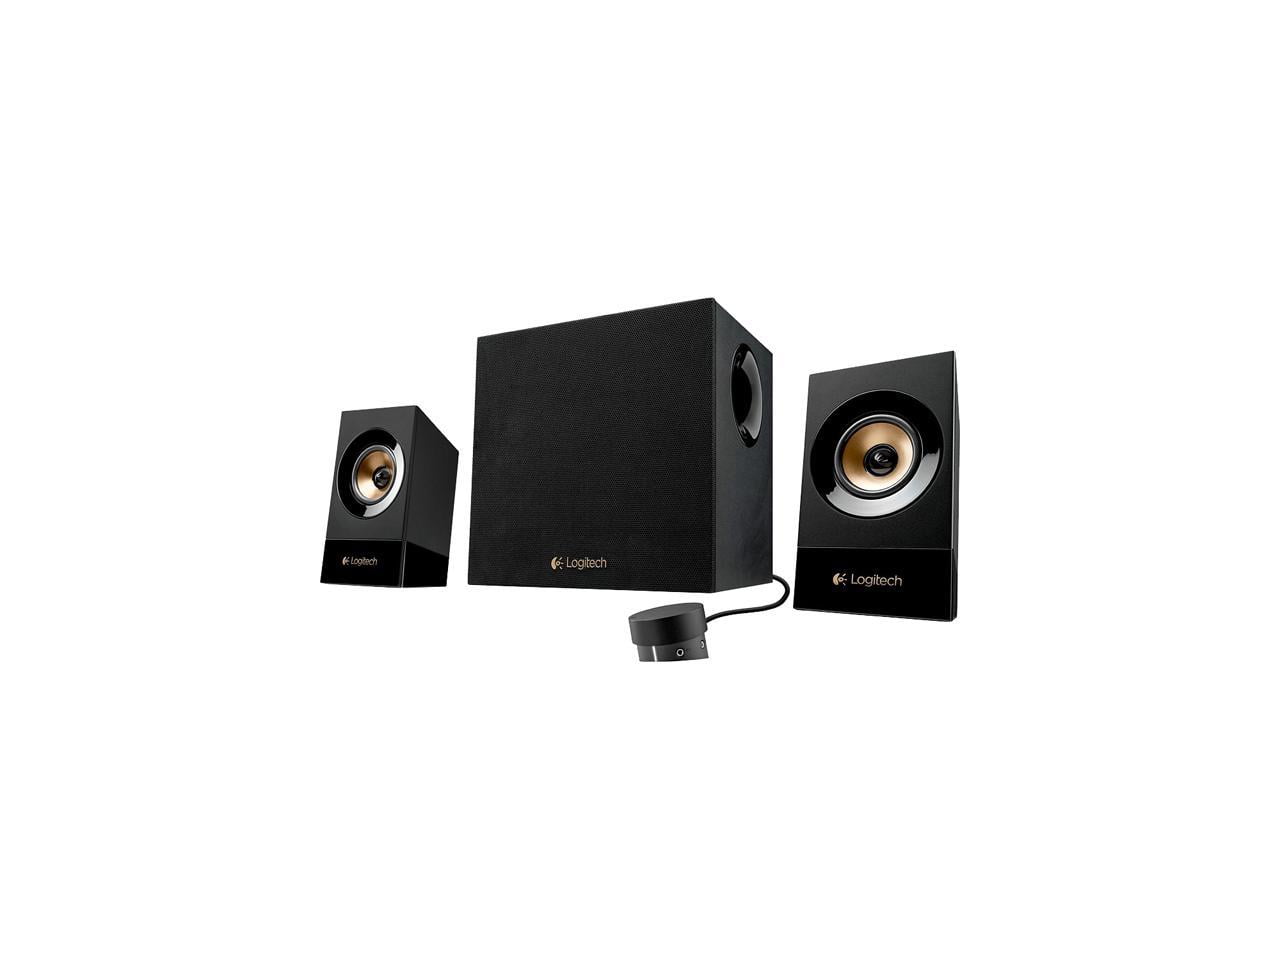 Logitech Z533 2.1 Multimedia Speaker System with Subwoofer, Powerful Sound, Booming Bass, 3.5mm Audio and RCA Inputs, Walmart.com